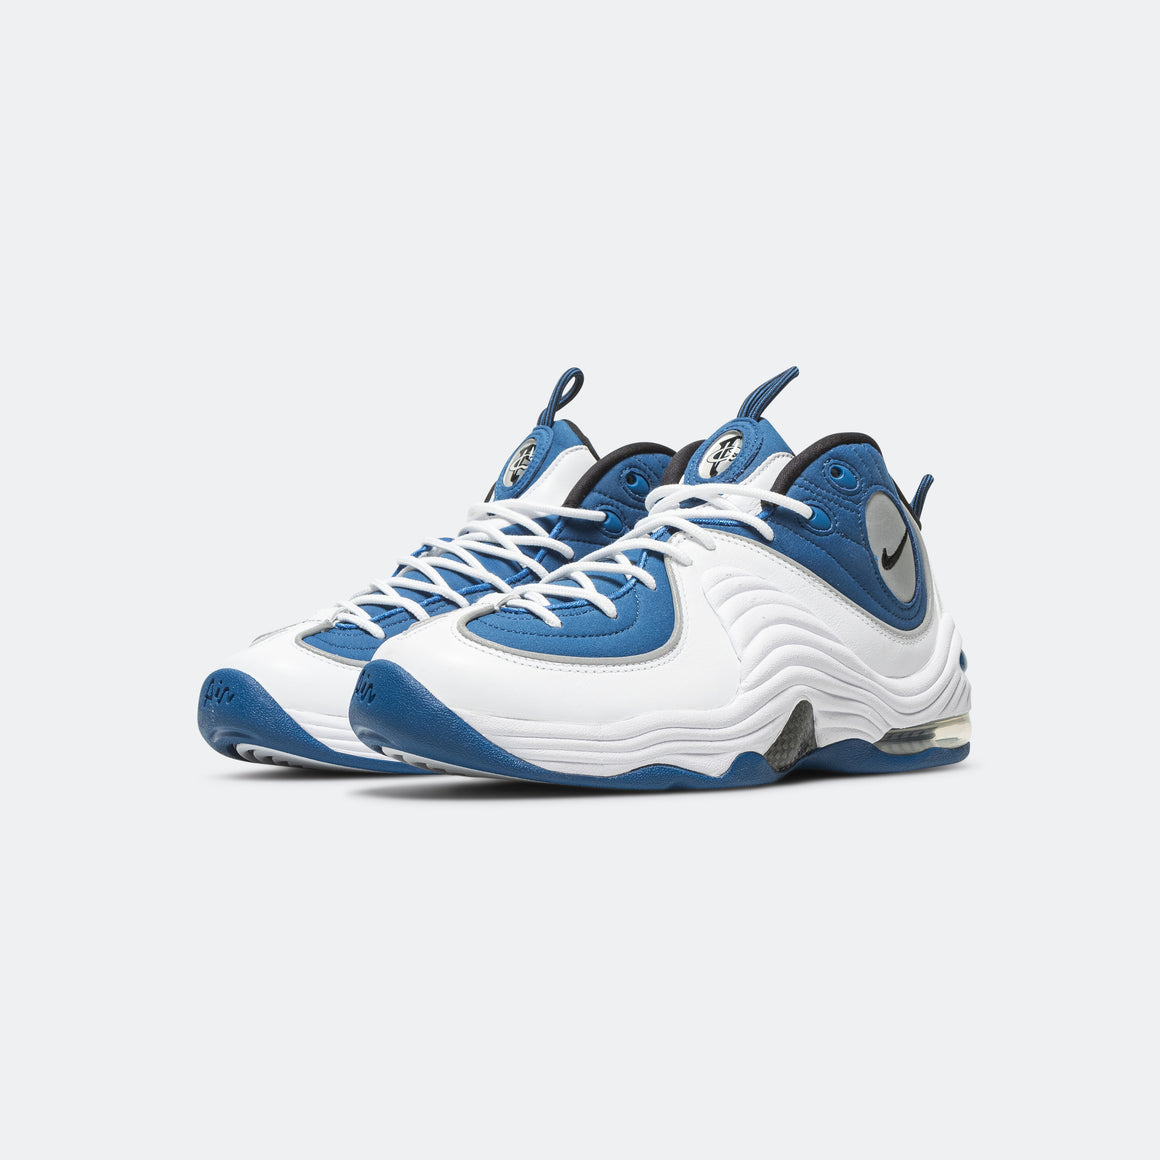 Nike - Air Penny 2 QS - Atlantic Blue/White-Black - UP THERE